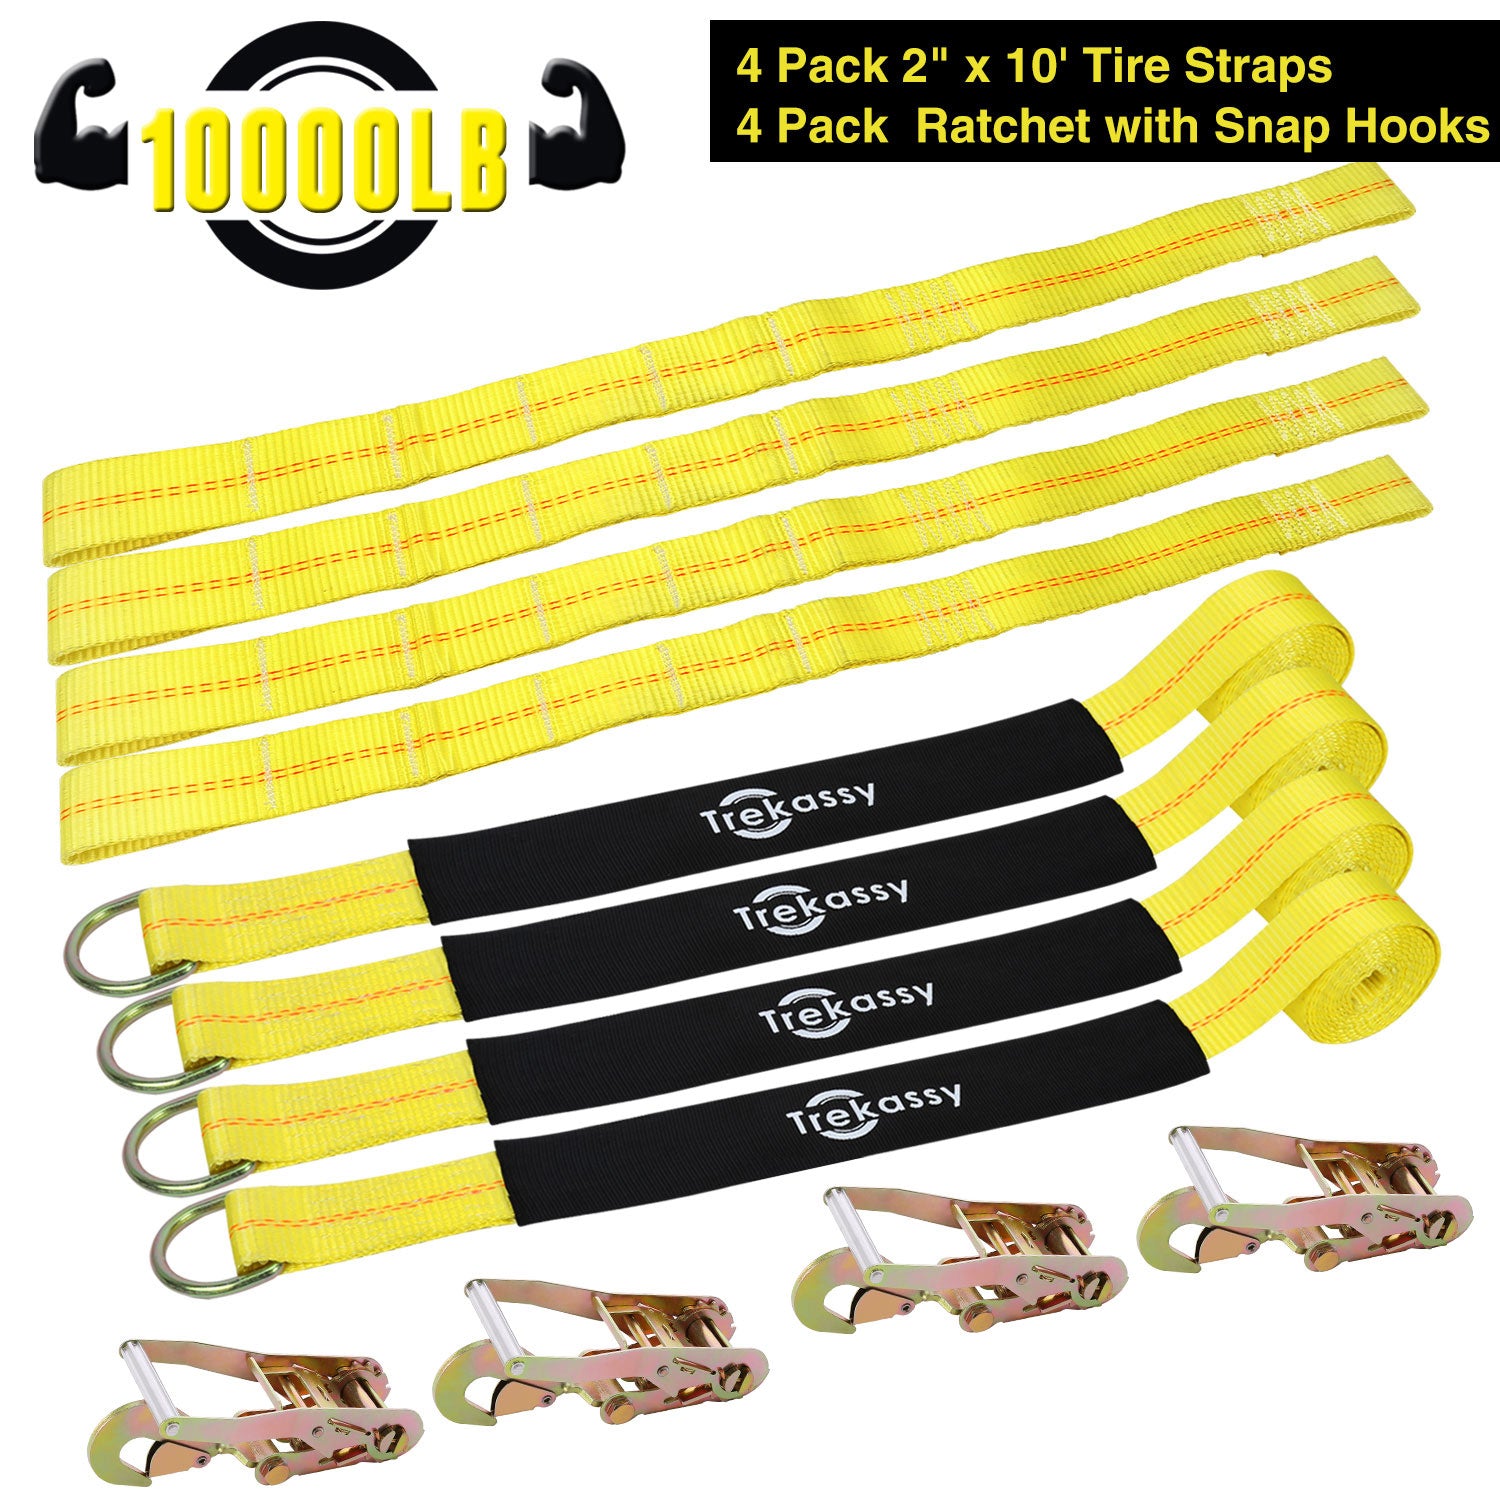 Trekassy 2" x 120" Car Tie Down Straps for Trailers with Snap Hooks